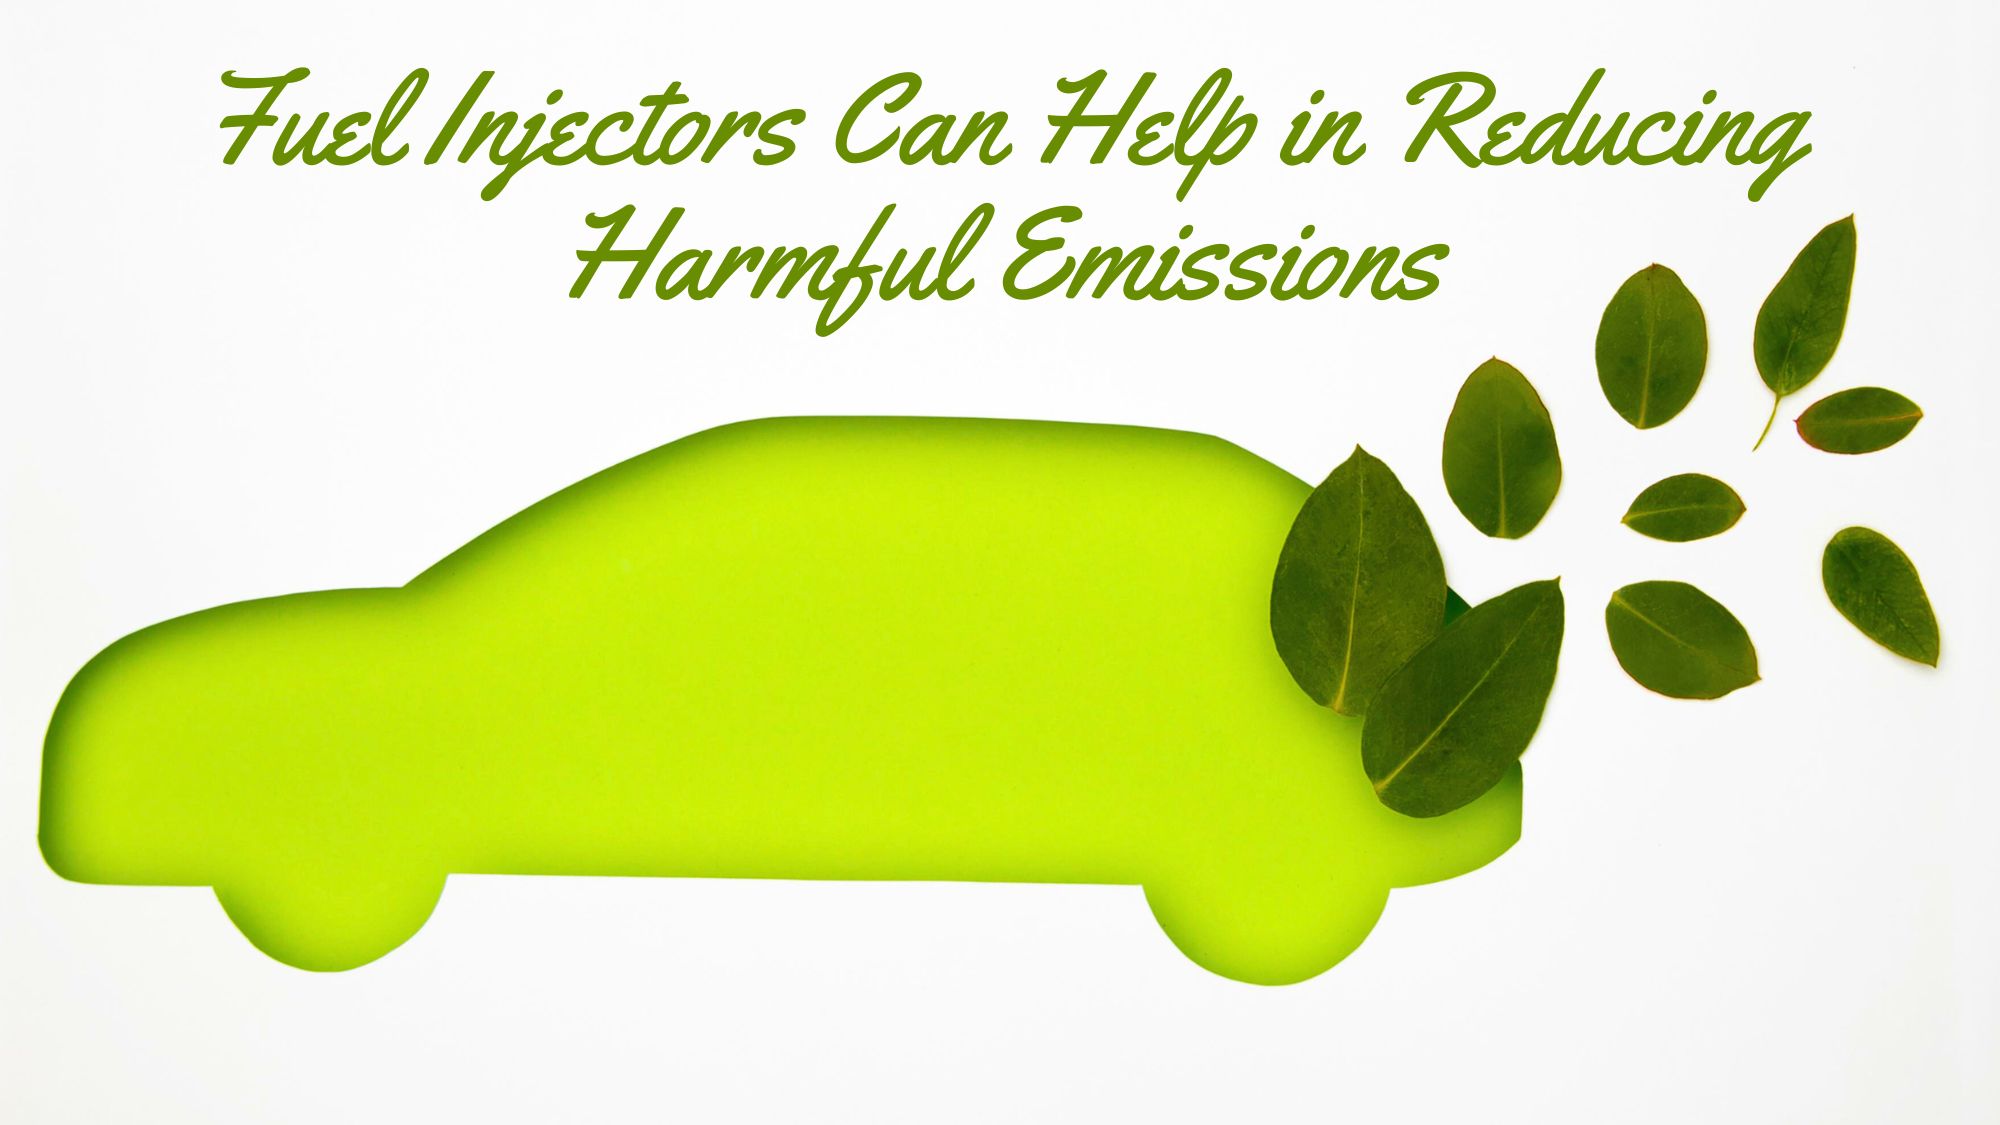 An eco-friendly car with tree leaves symbolizing how fuel injectors can help in reducing harmful emissions